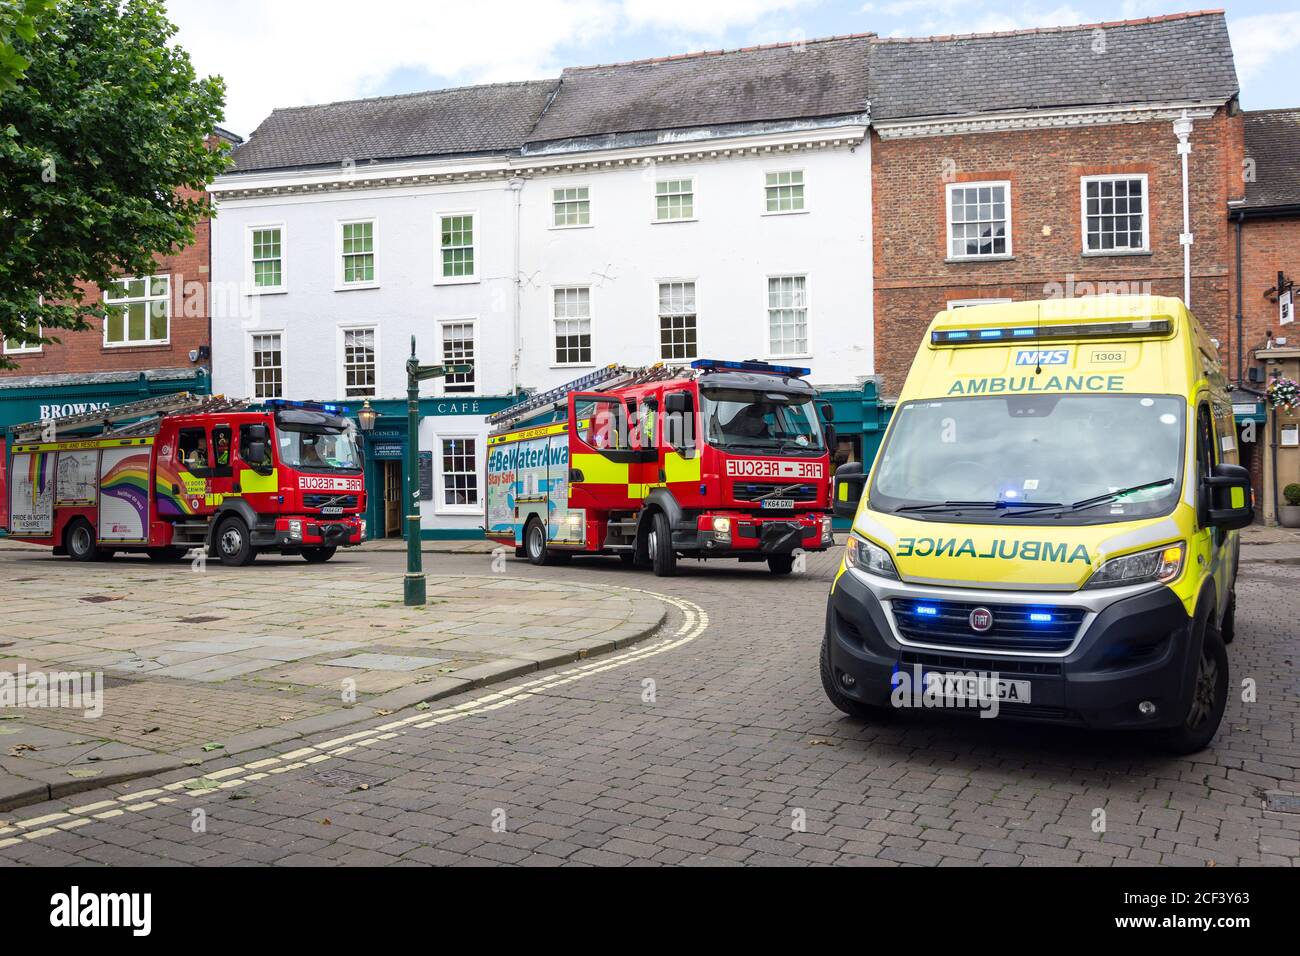 NHS emergency services ambulance and fire rescue engines,  St Sampson's Square, York, North Yorkshire, England, United Kingdom Stock Photo